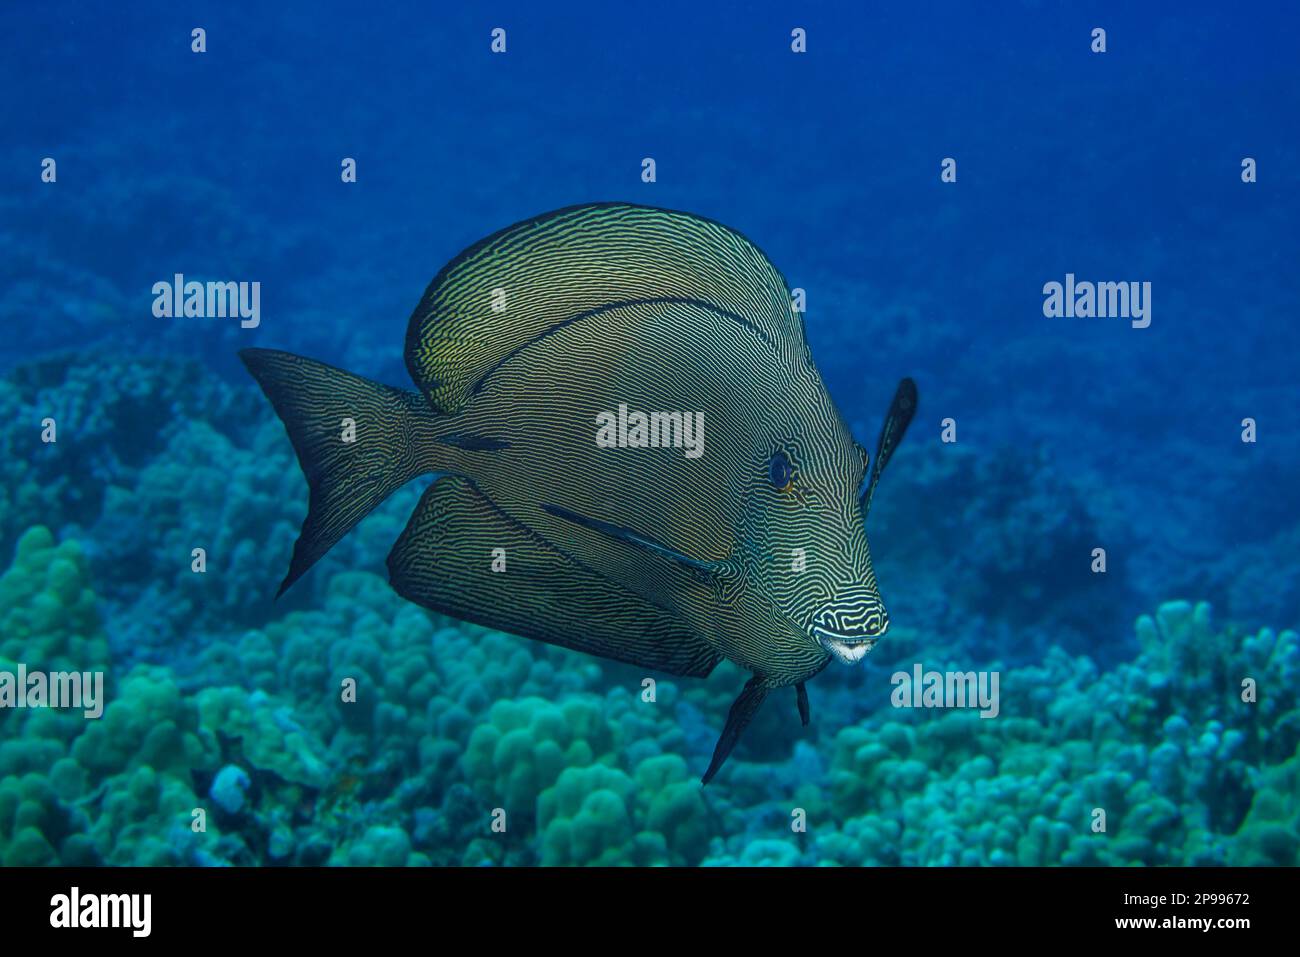 The scientific name for the black surgeonfish, Ctenochaetus hawaiiensis, suggests that it is endemic to Hawaii where this one was photographed, althou Stock Photo